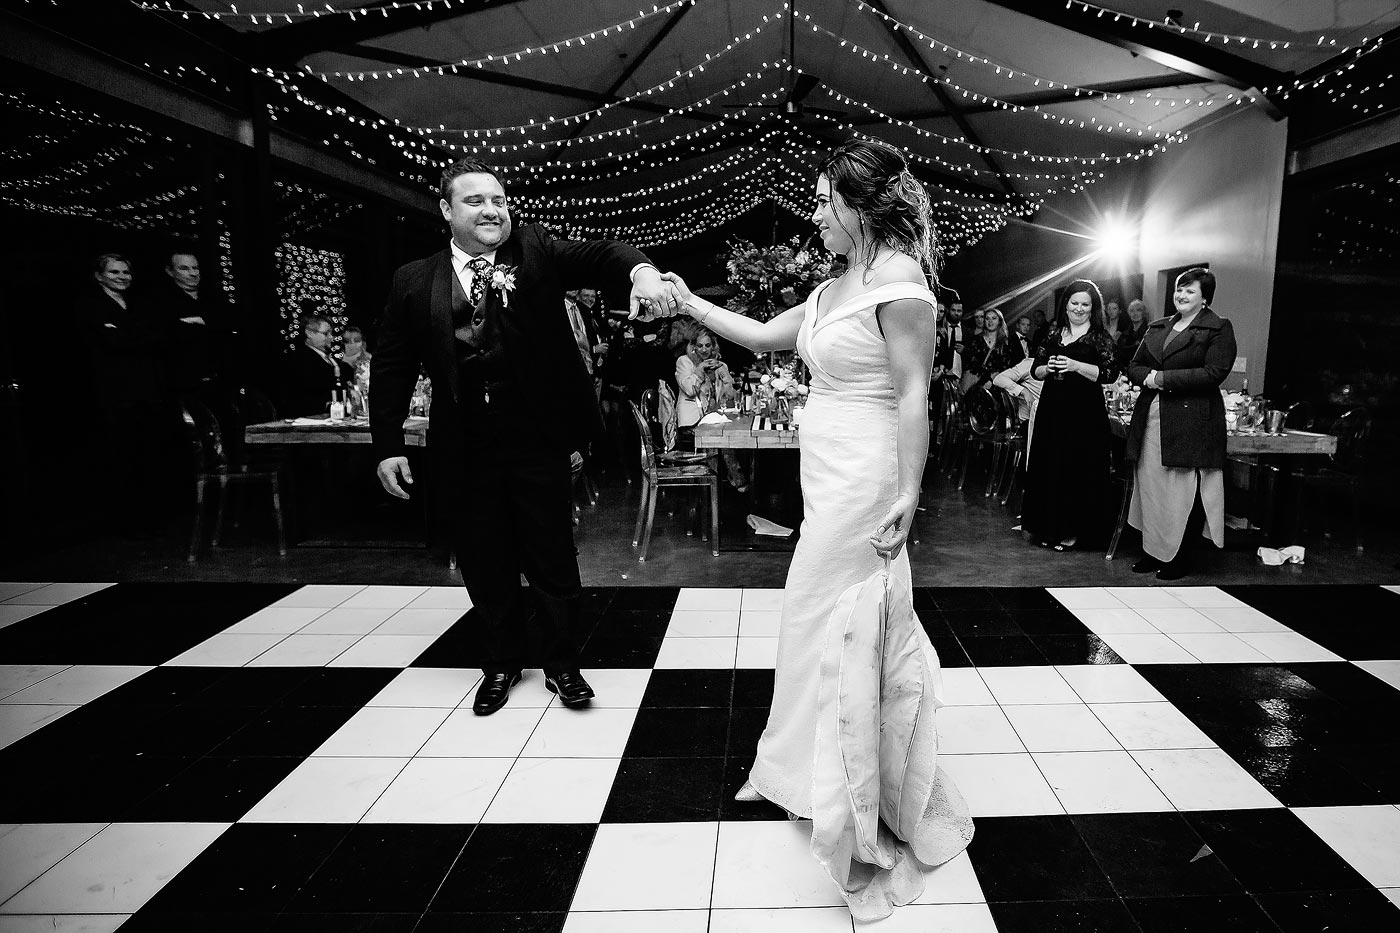 Classic wedding first dance moves on the dancefloor